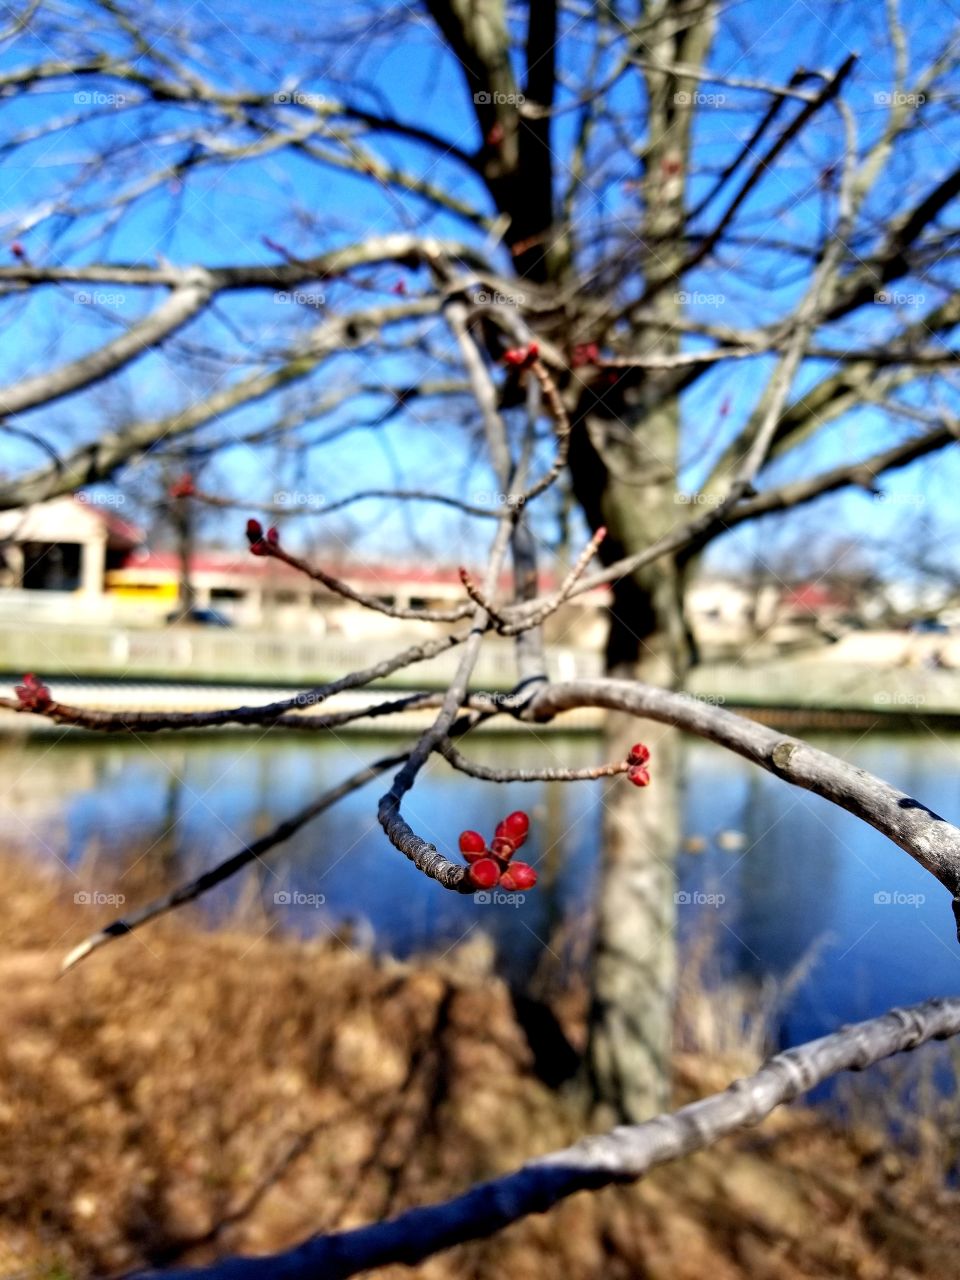 Spring is around the corner. Beautiful day at the park. Blue sky as blue as the lake. Leaf buds and flower buds are starting to blossom on the branches of the trees.